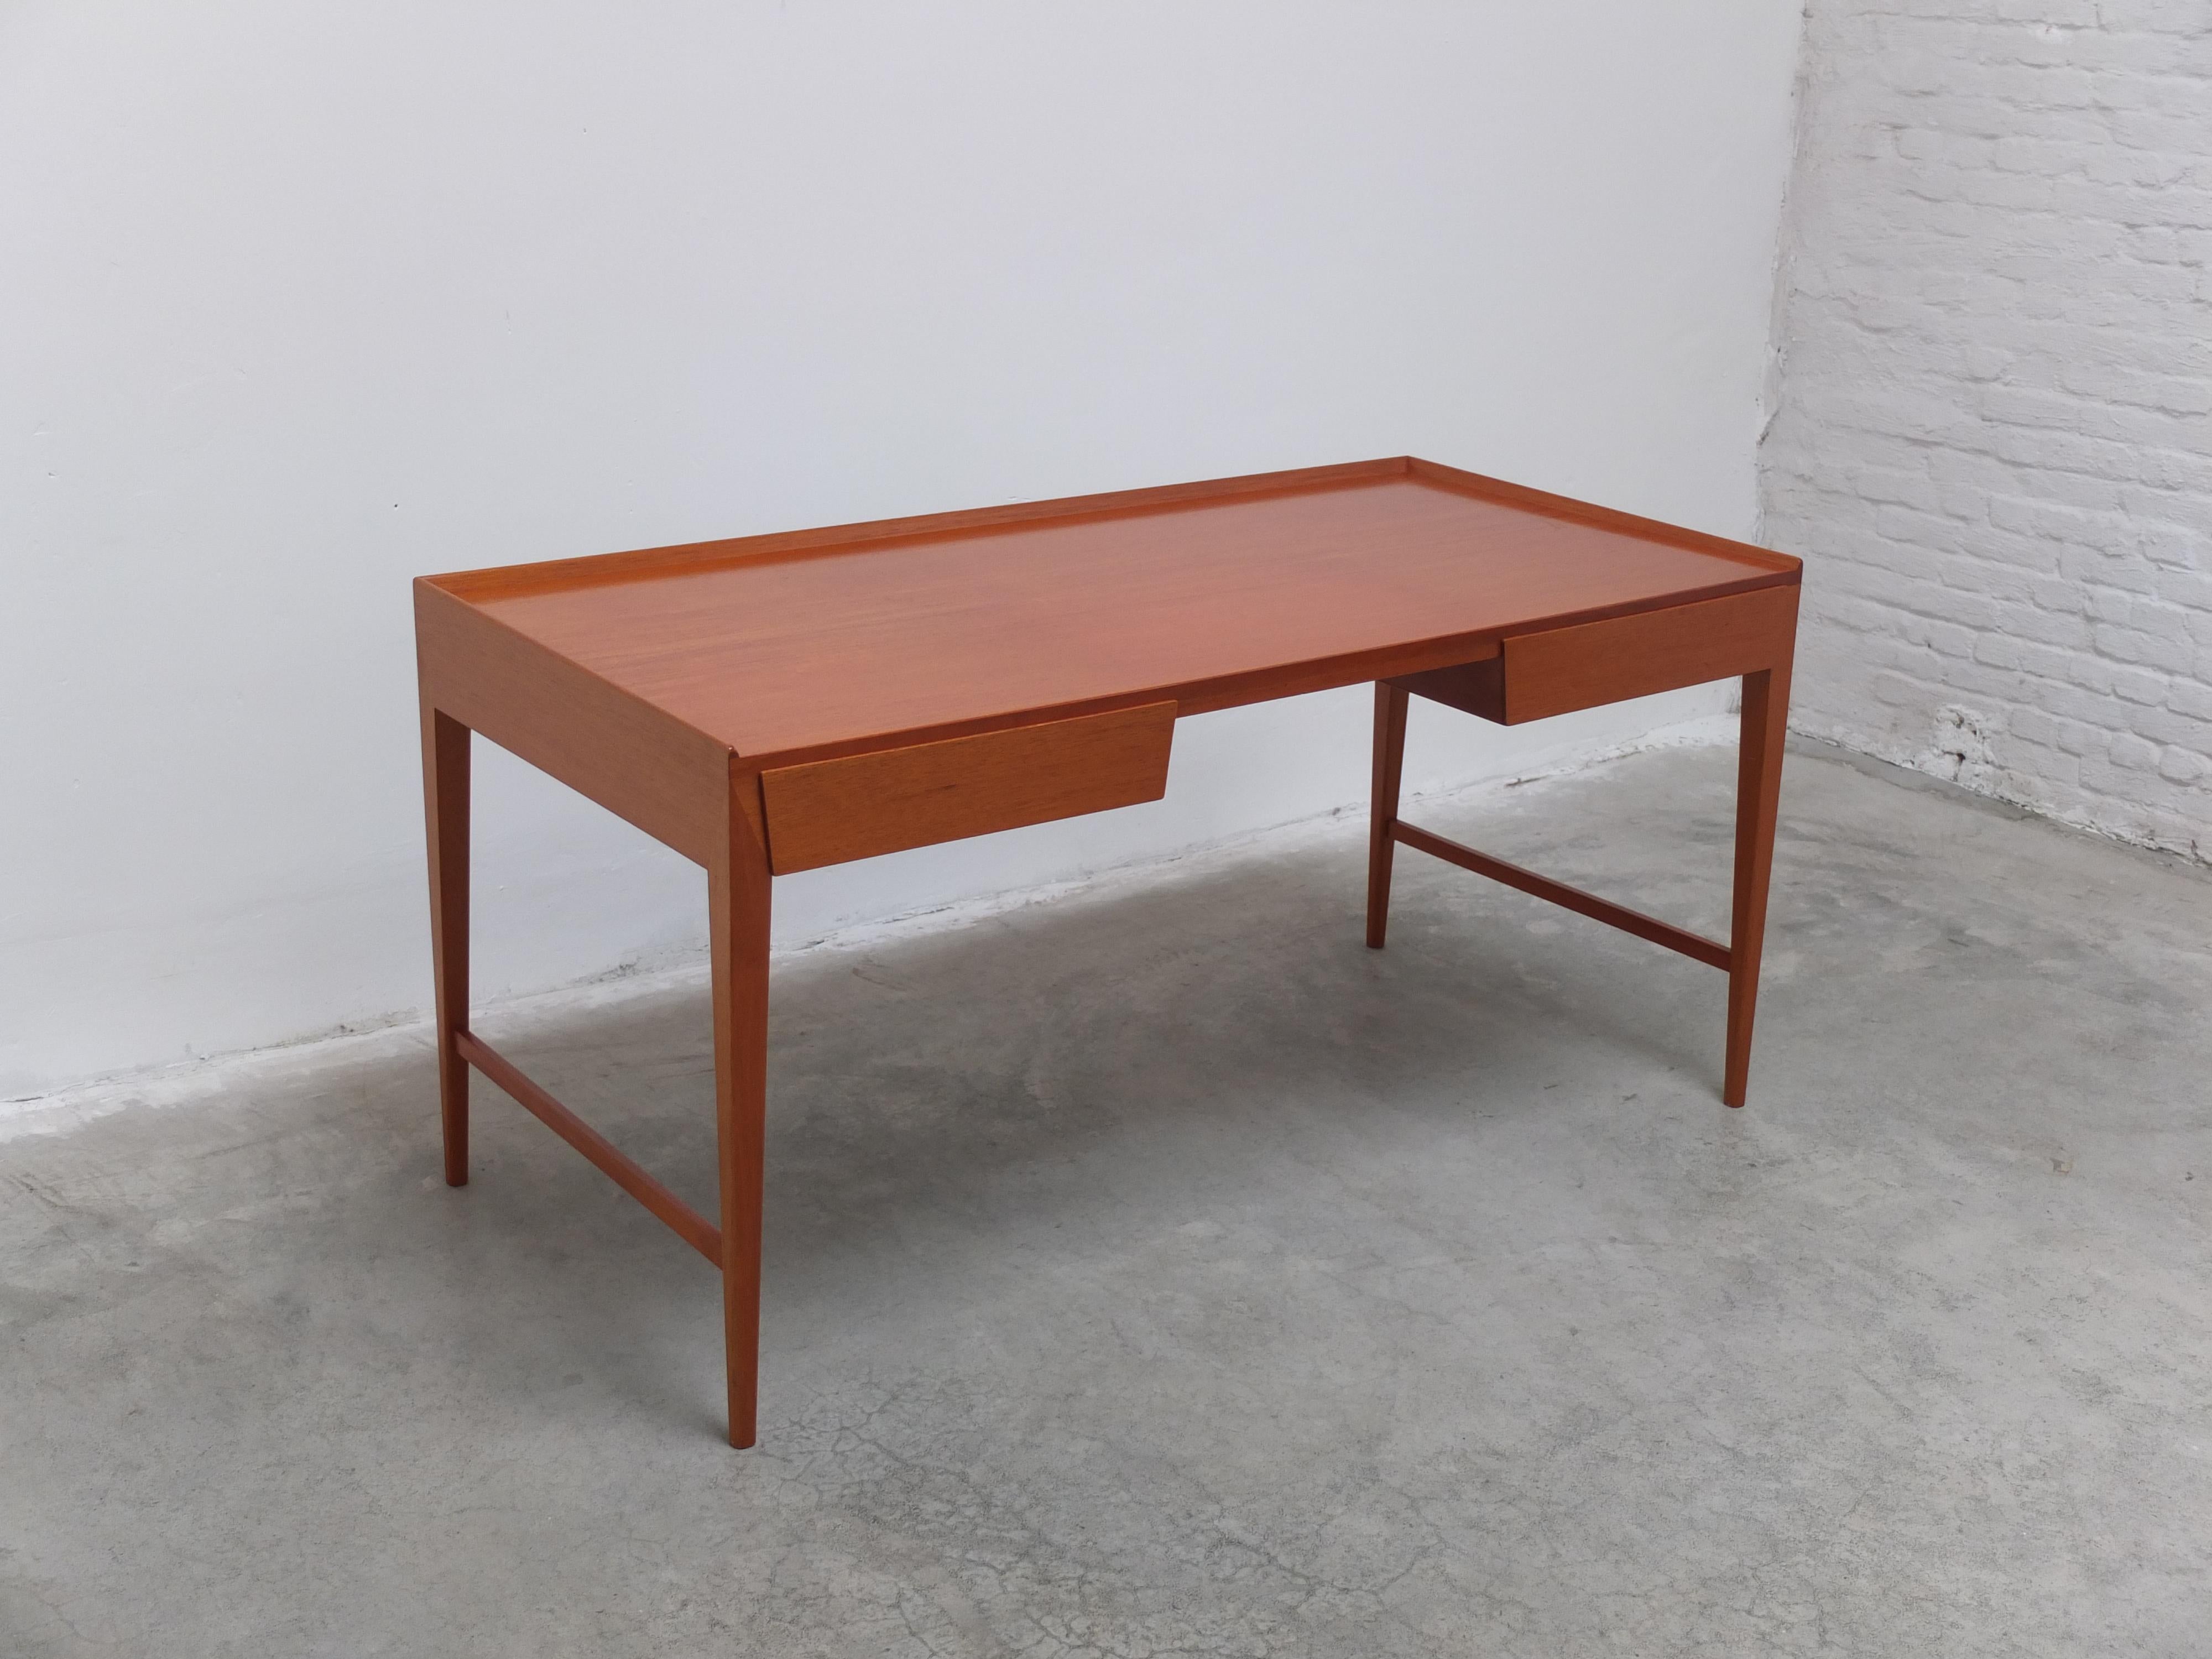 European Rare Freestanding Desk by Frode Holm for Illums Bollighus, 1950s For Sale